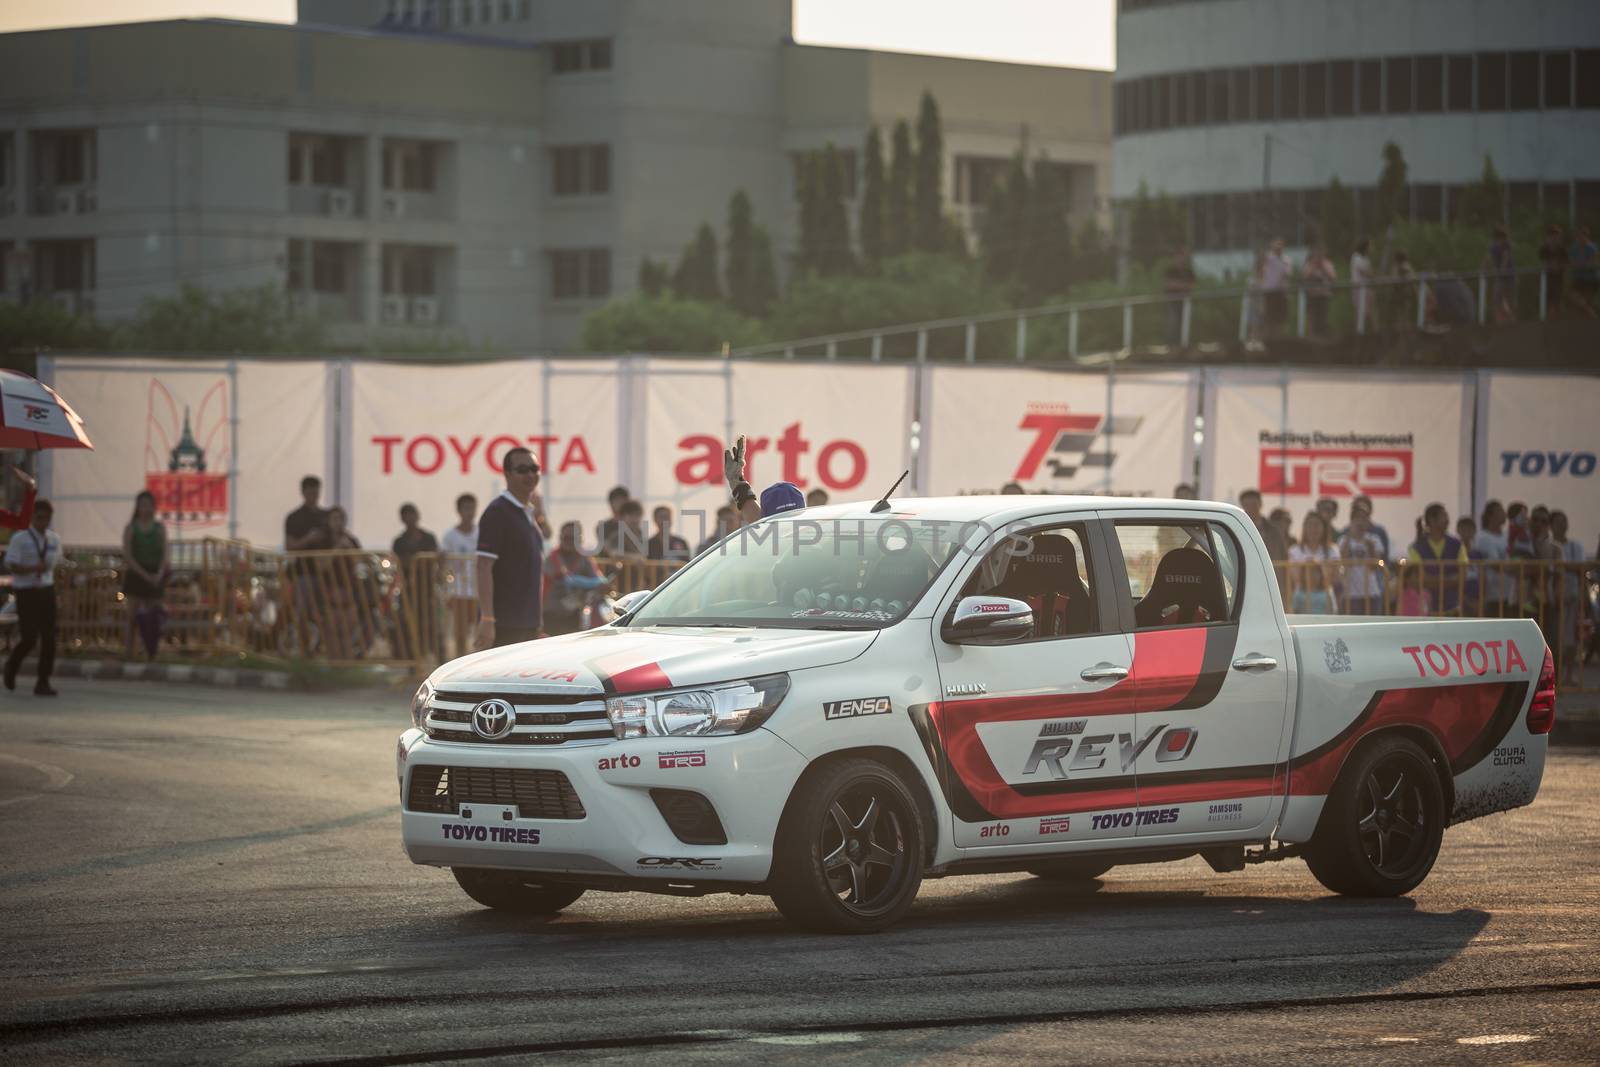 Udon Thani, Thailand - October 18, 2015: Techapol Toyingchareon the driver of Toyota Hilux Revo waving hand to the audiences after drifting contest on the track between driver from Thailand and Japan at the event Toyota Motor Sport show at Udon Thani, Thailand